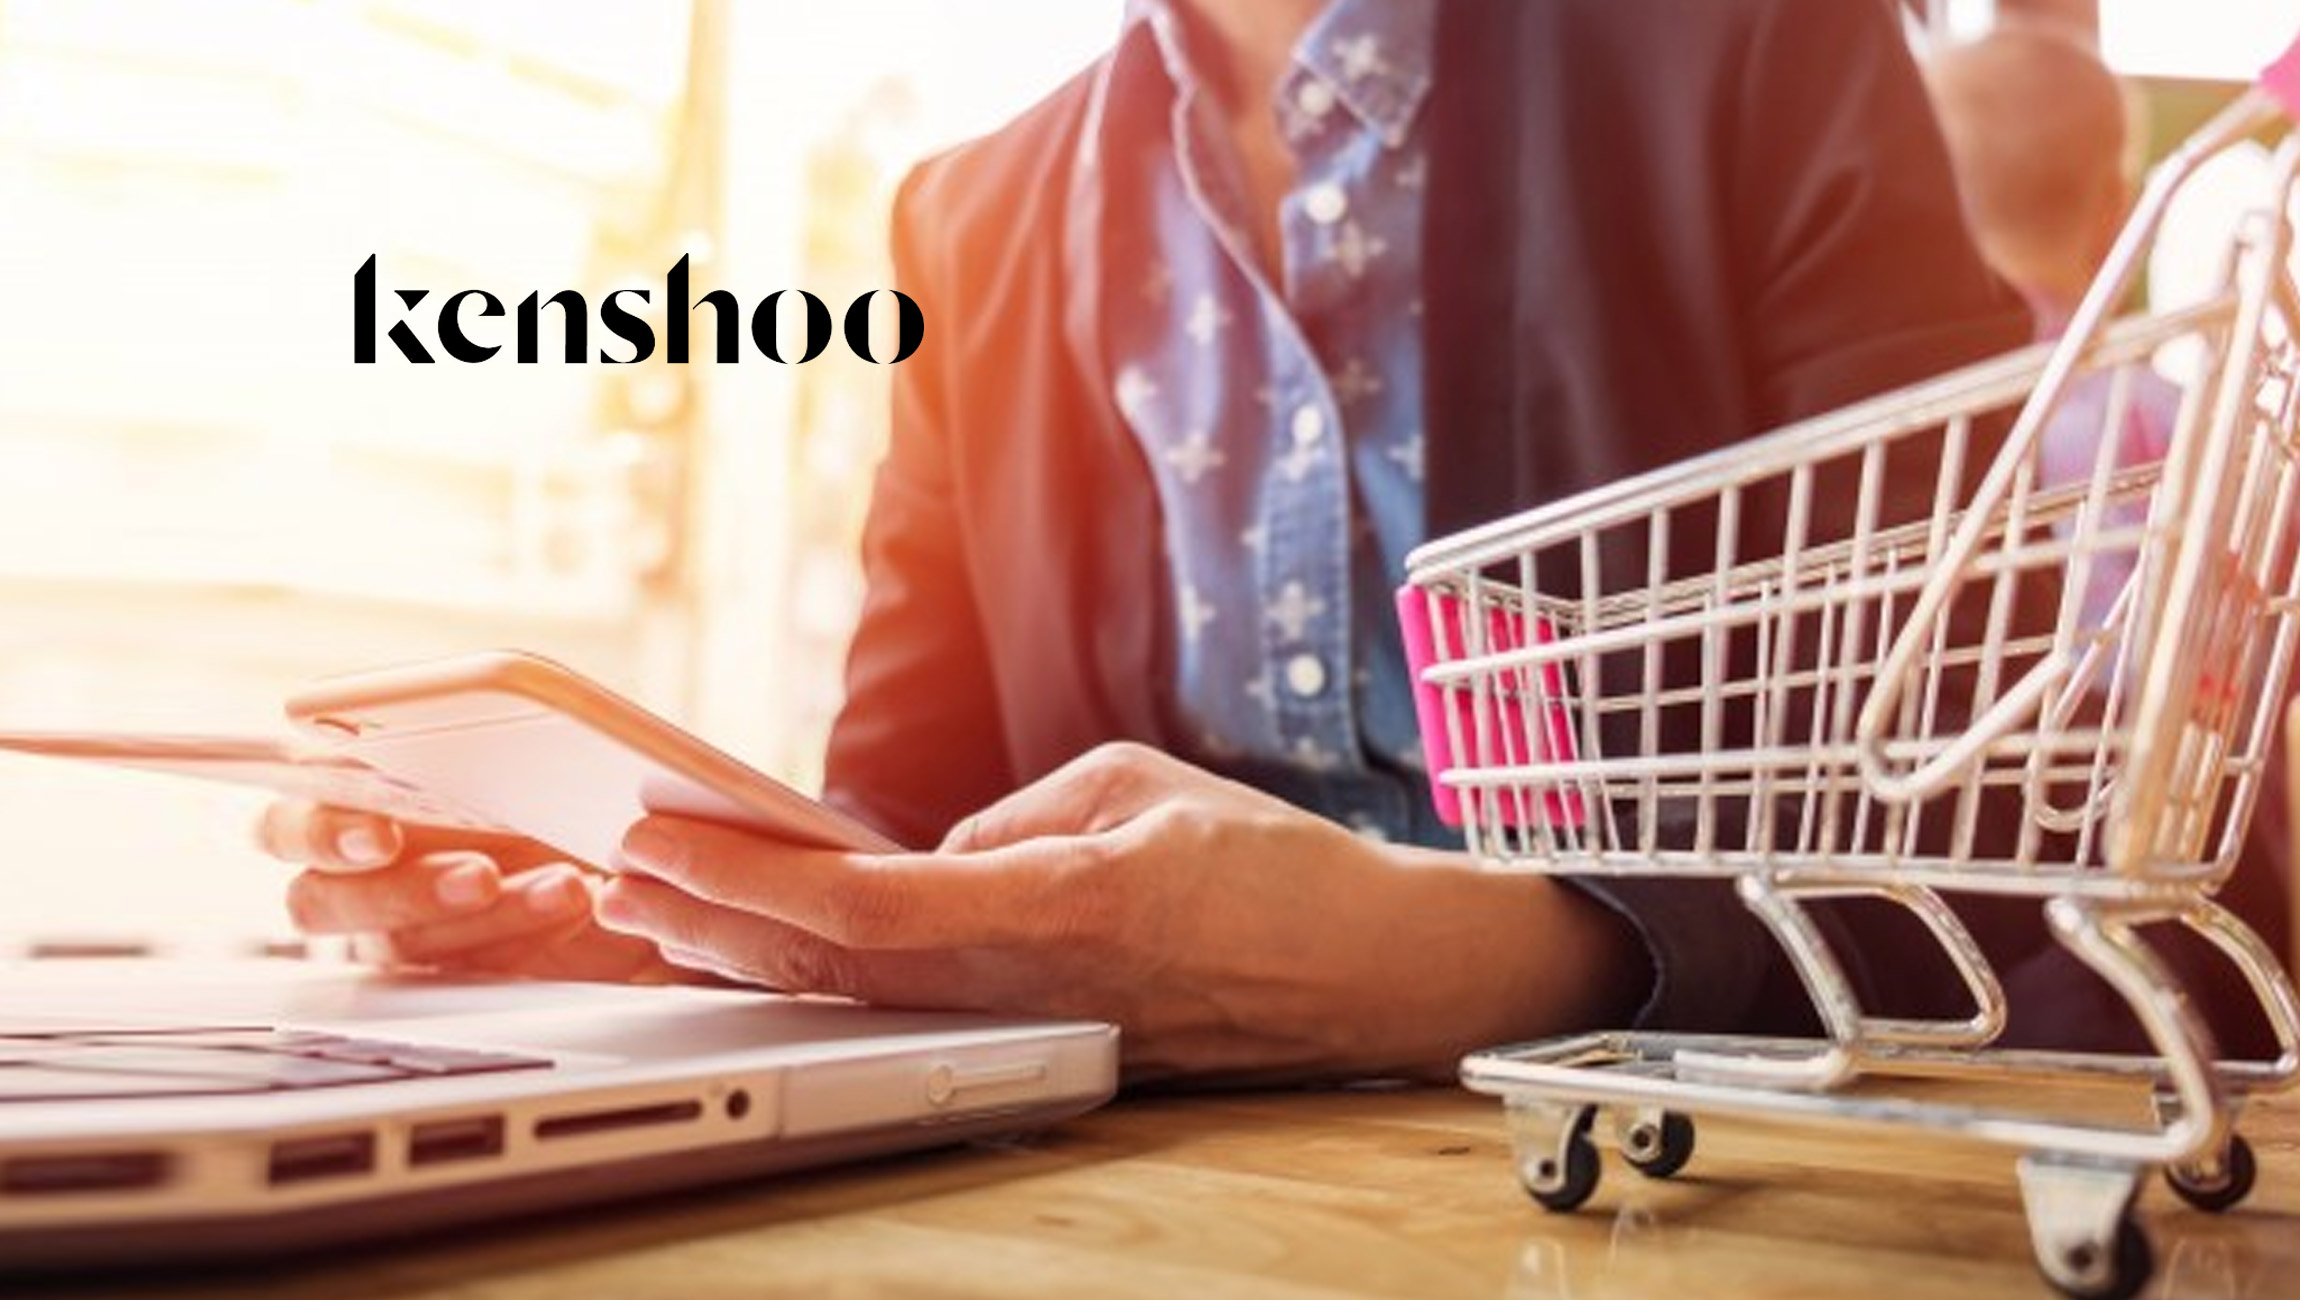 Acceleration of Online Shopping in 2020 Yielded Robust Growth Across Digital Channels in the First Quarter of This Year, Kenshoo Report Reveals